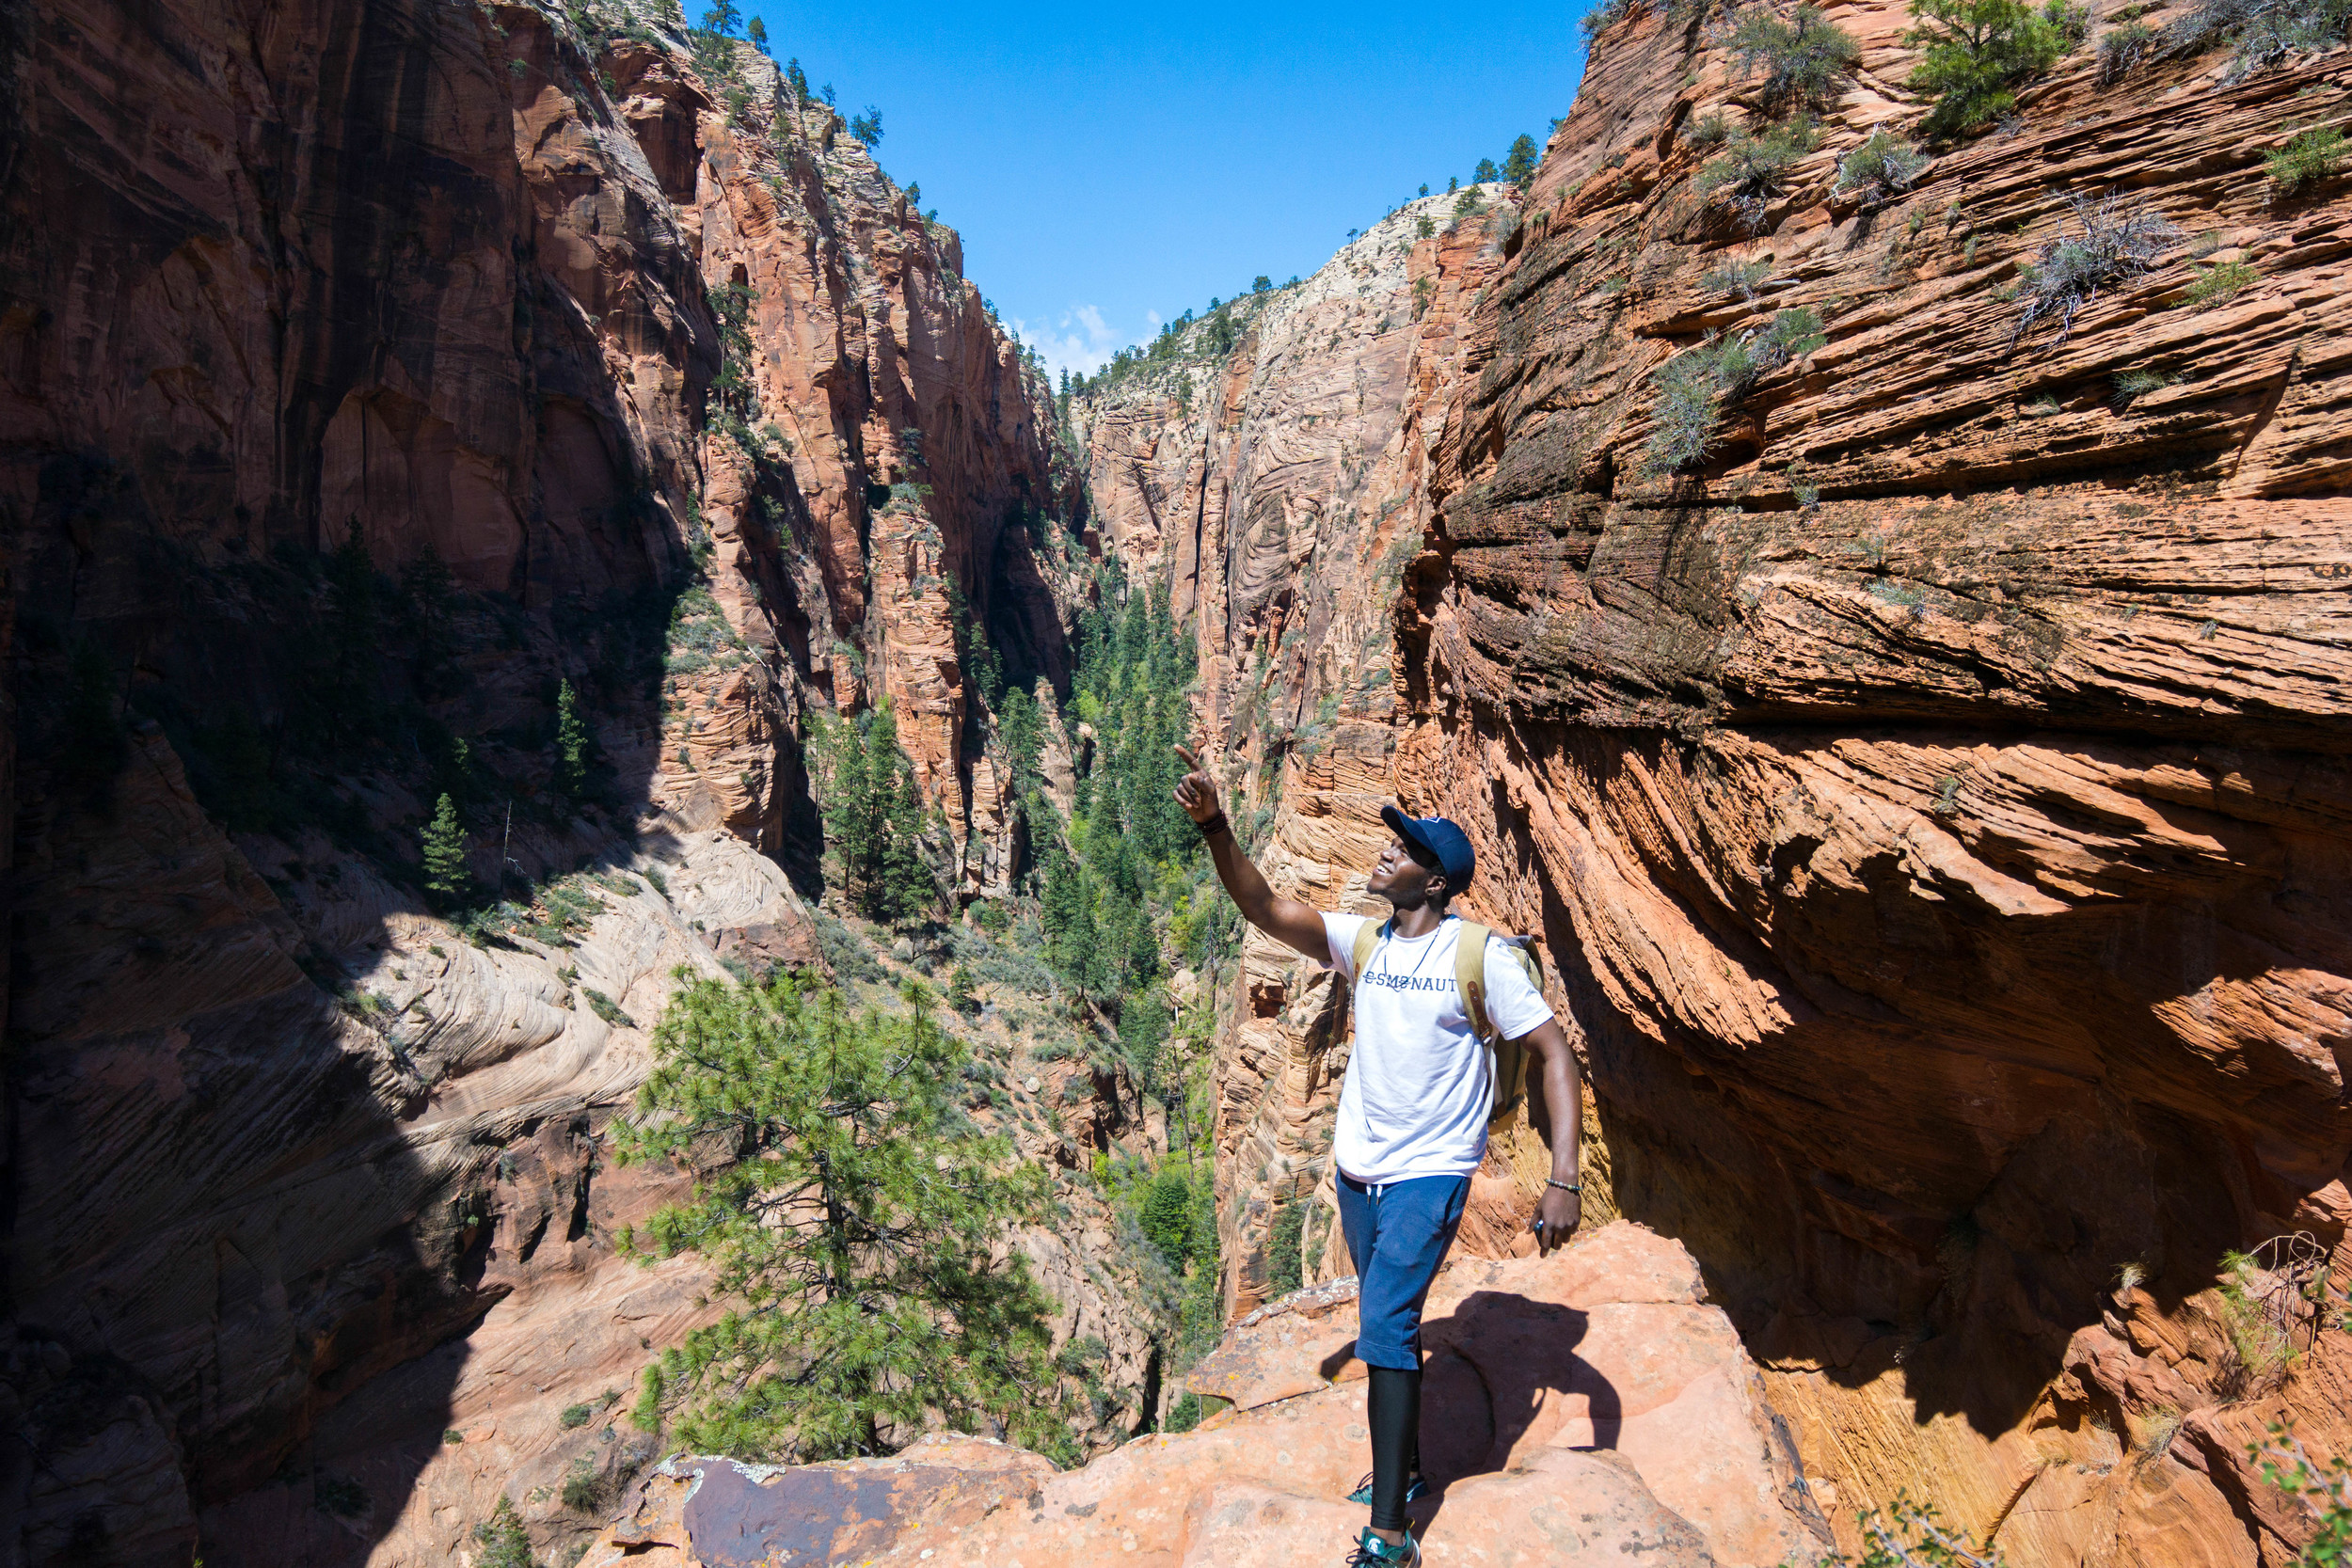 The stoke is real in Zion